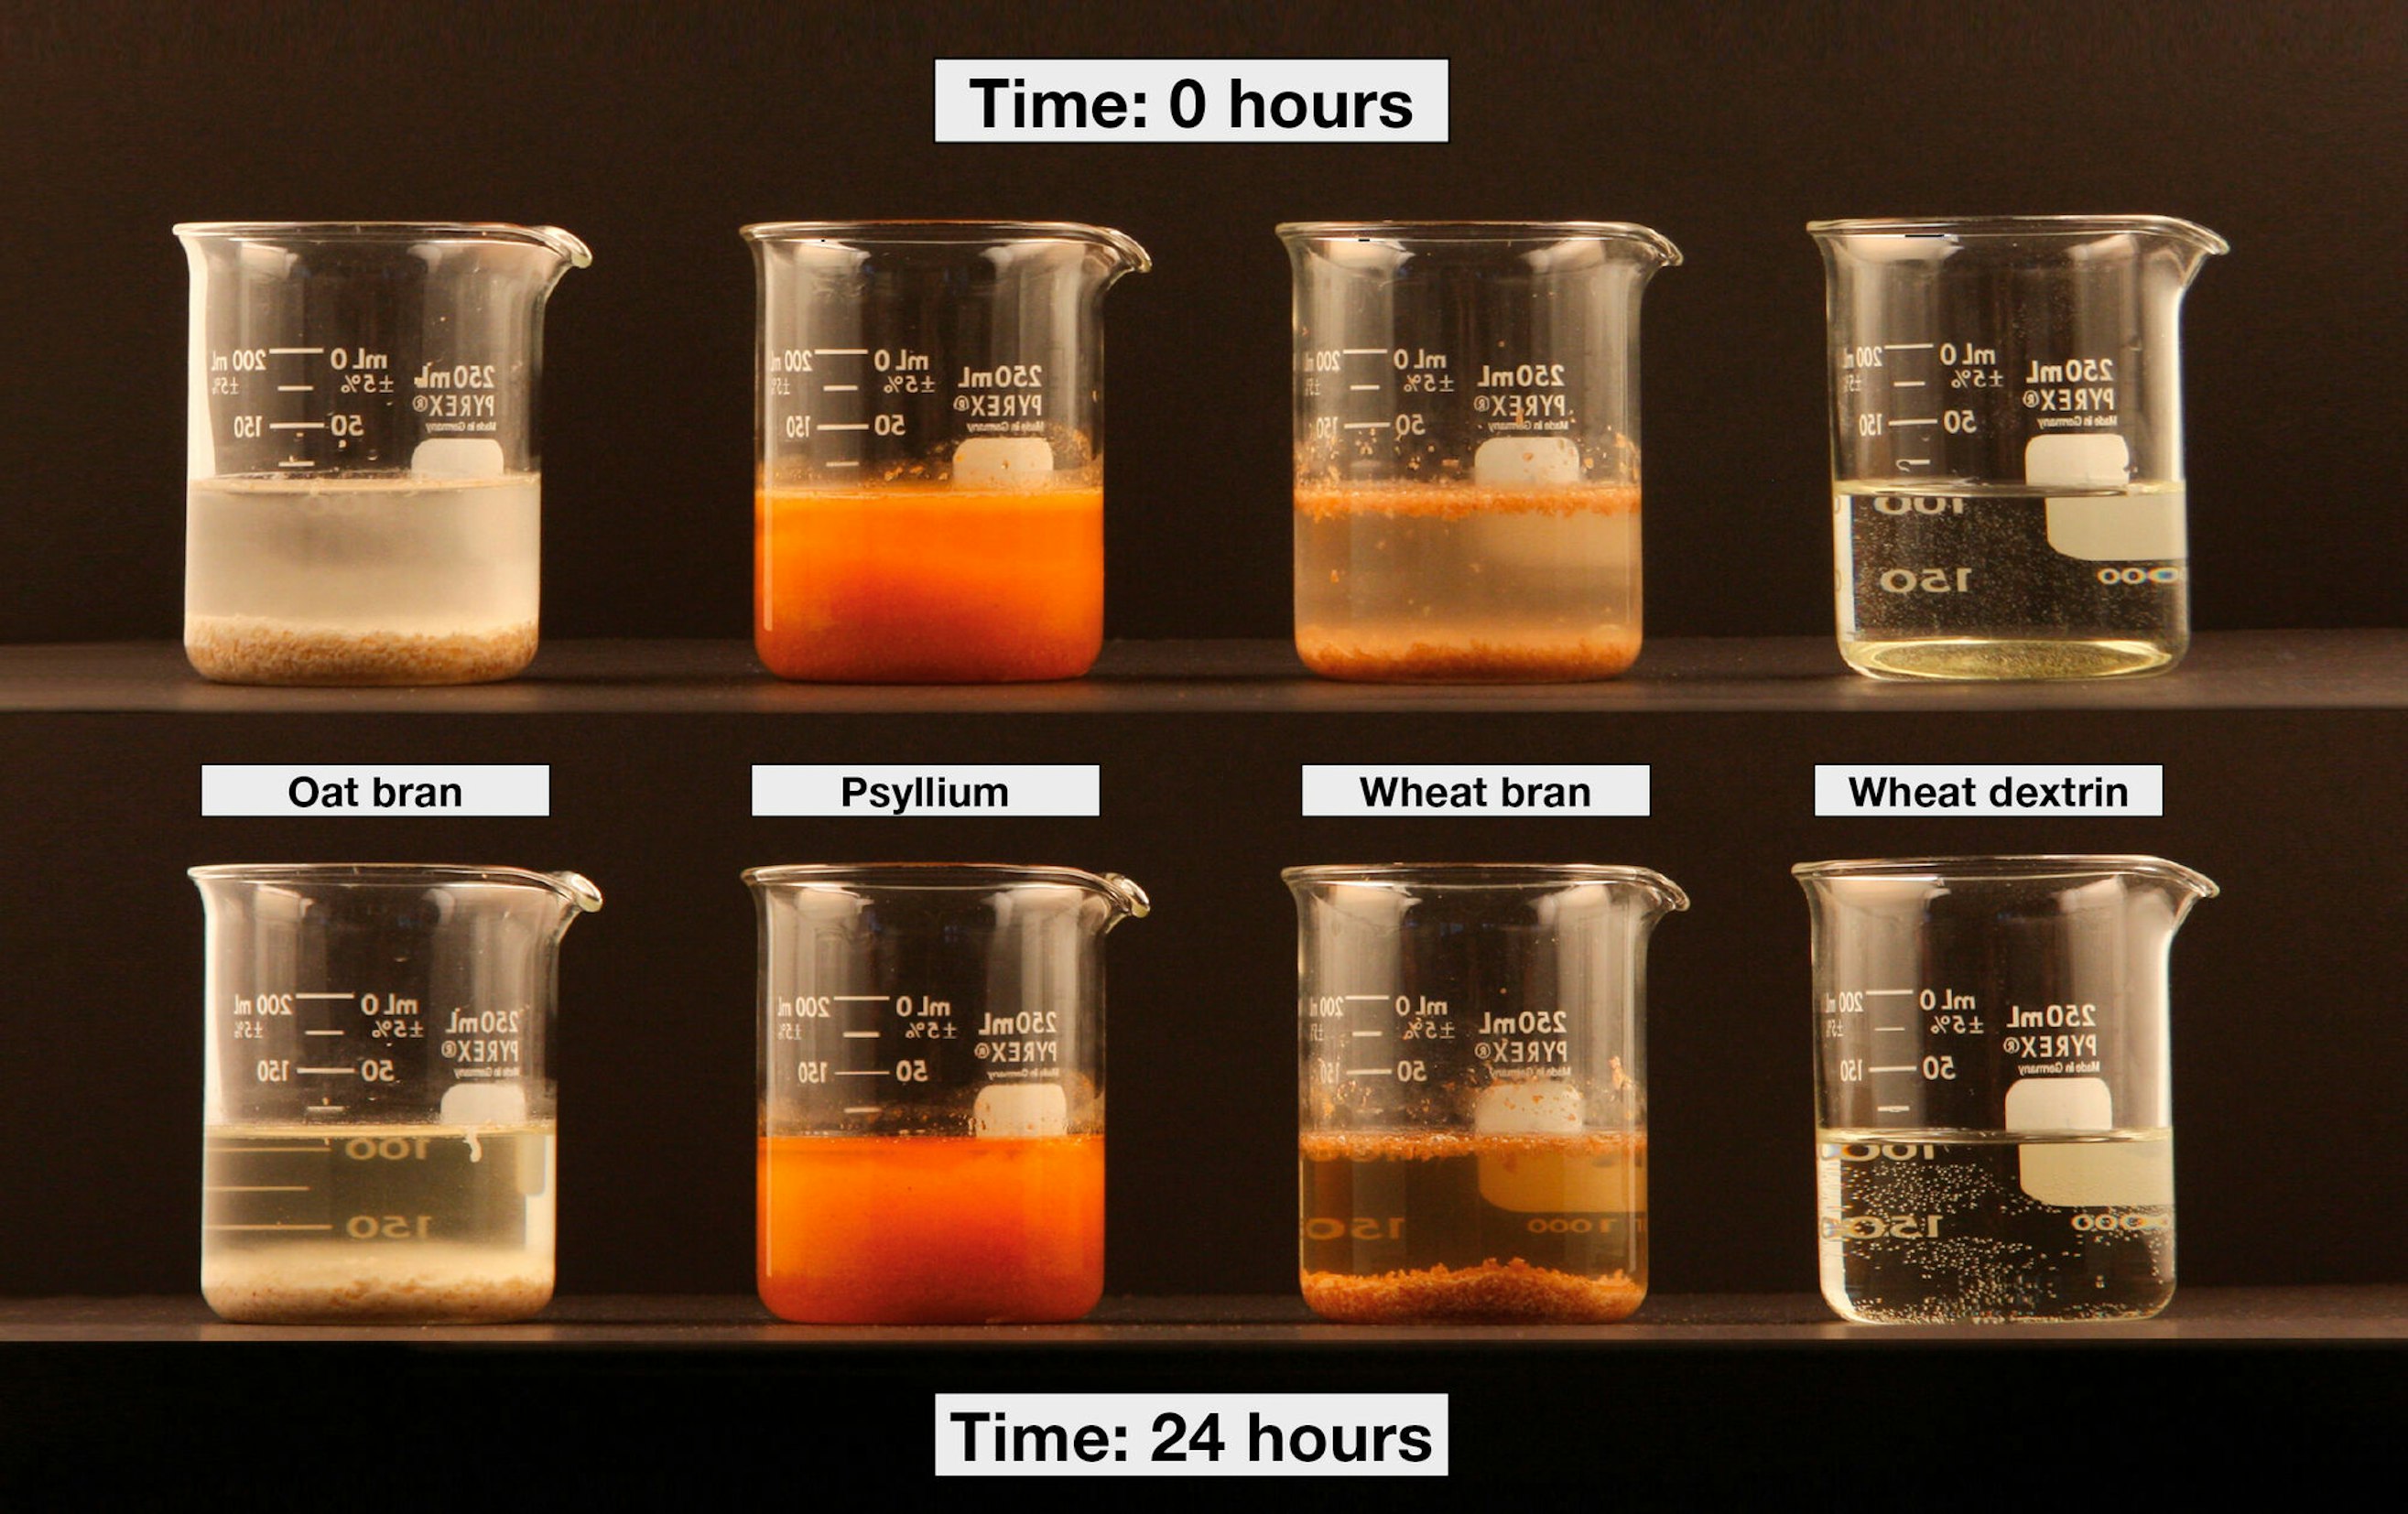 A demonstration of the solubility and viscosity of different fiber sources where equal amounts are added to 100 mL water. The oat and wheat bran do not absorb water and no changes are seen after 24 hours, whilst the wheat dextrin powder dissolves immediately and stays in solution. Psyllium powder absorbs water and forms a thick gel after 24 hours.